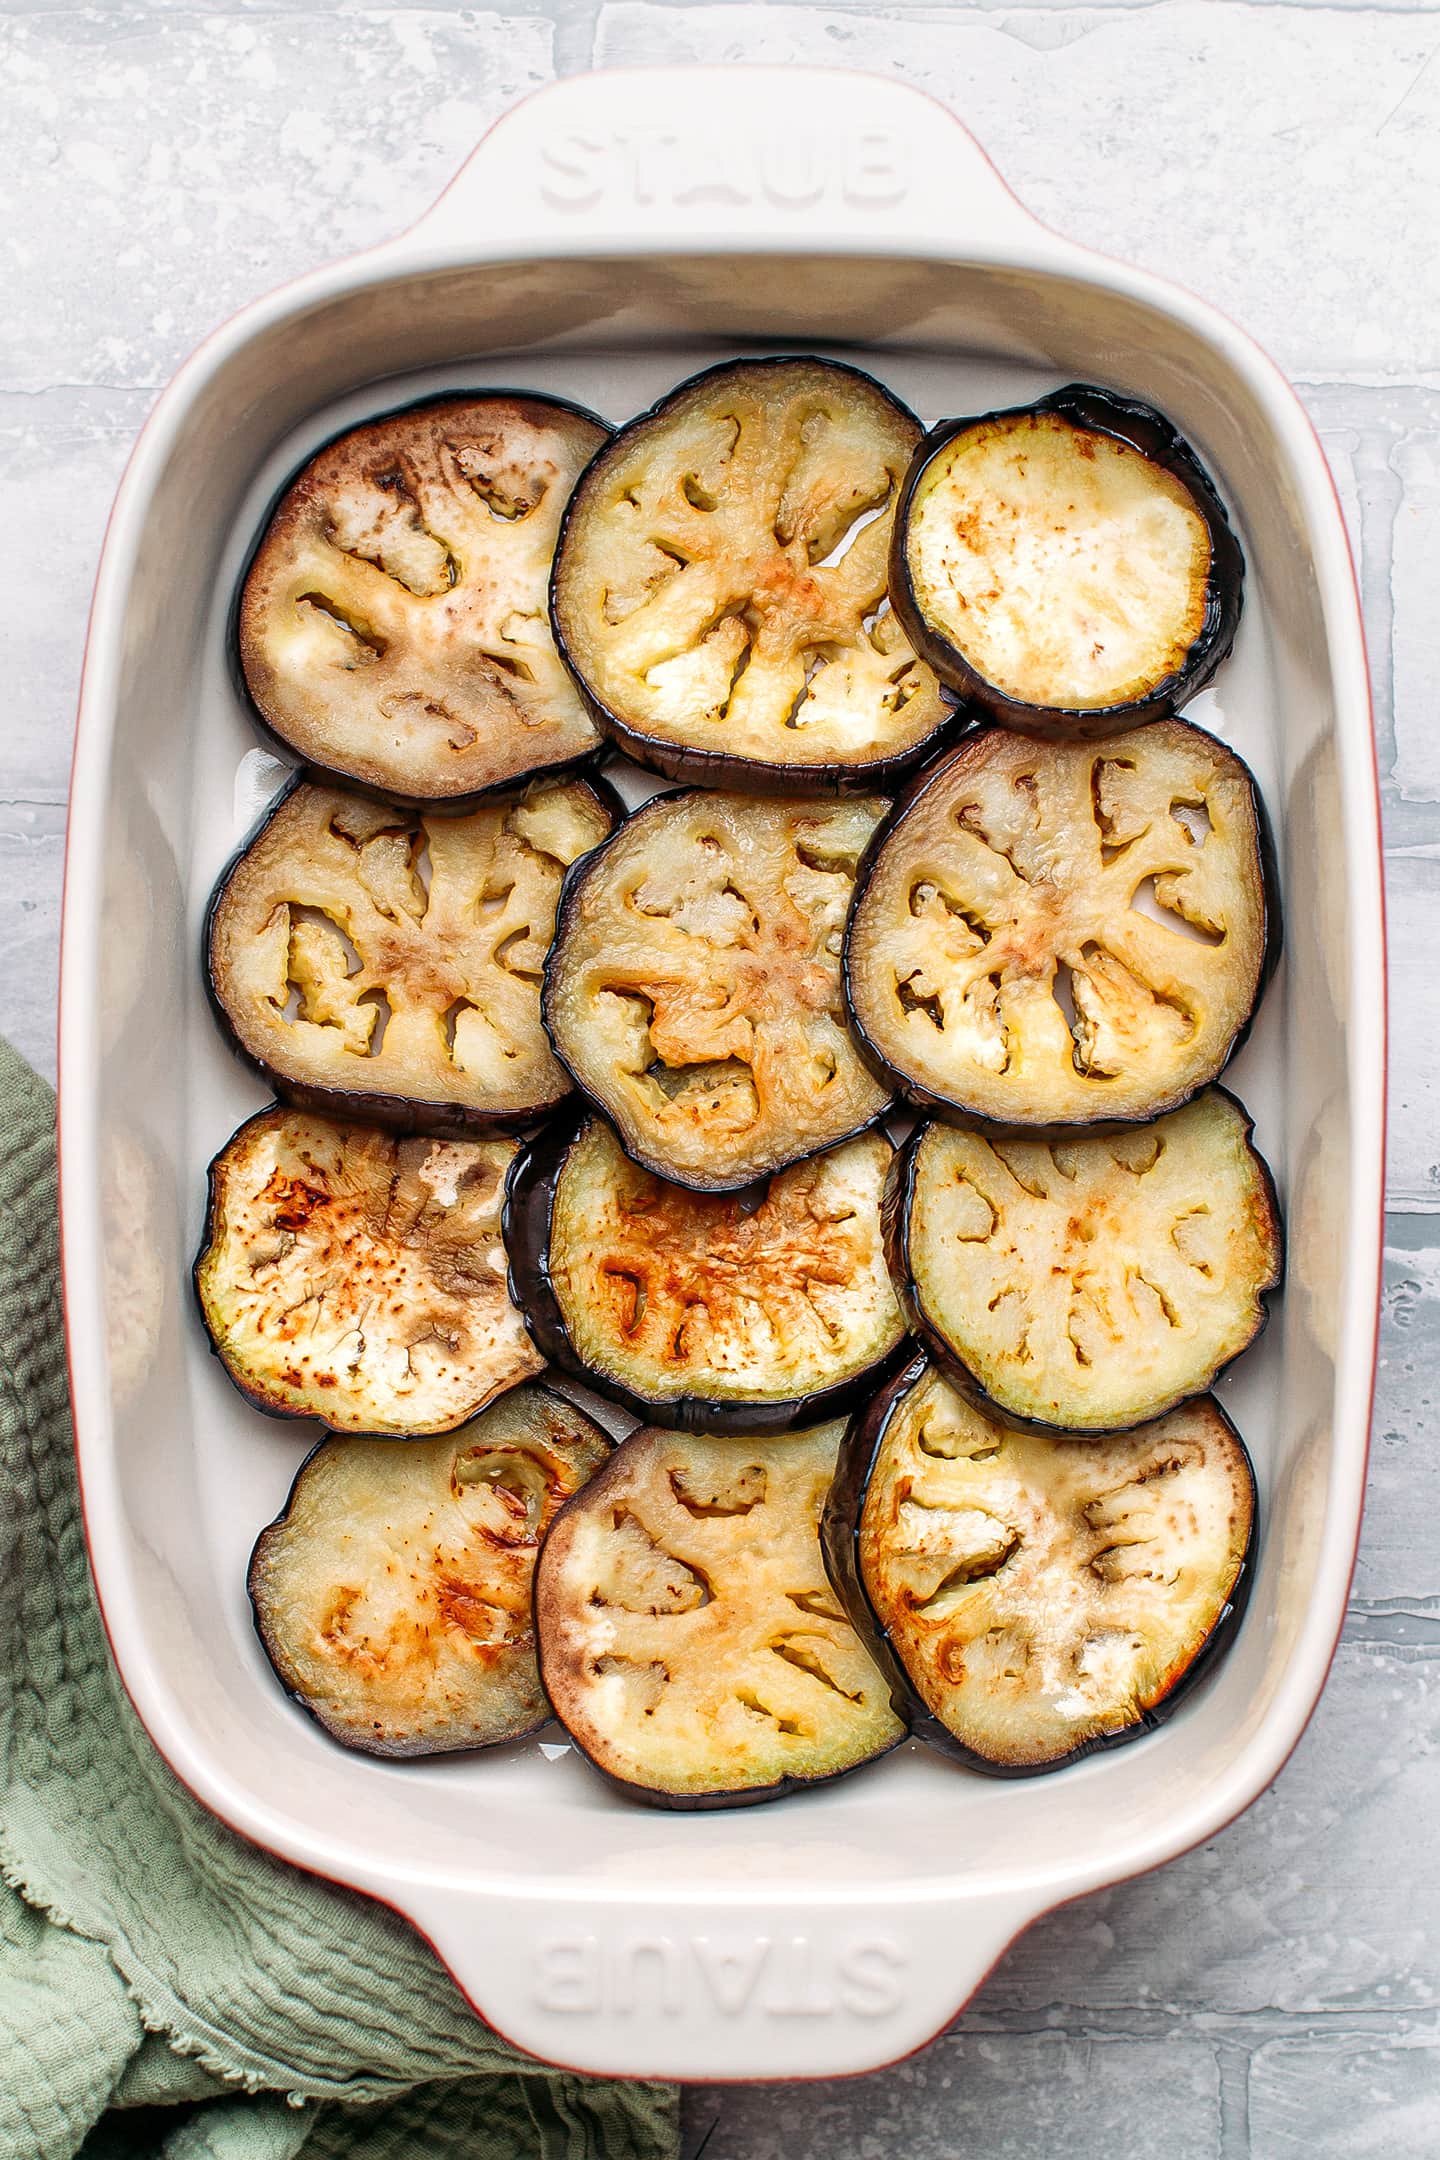 Sautéed eggplant slices in a baking dish.